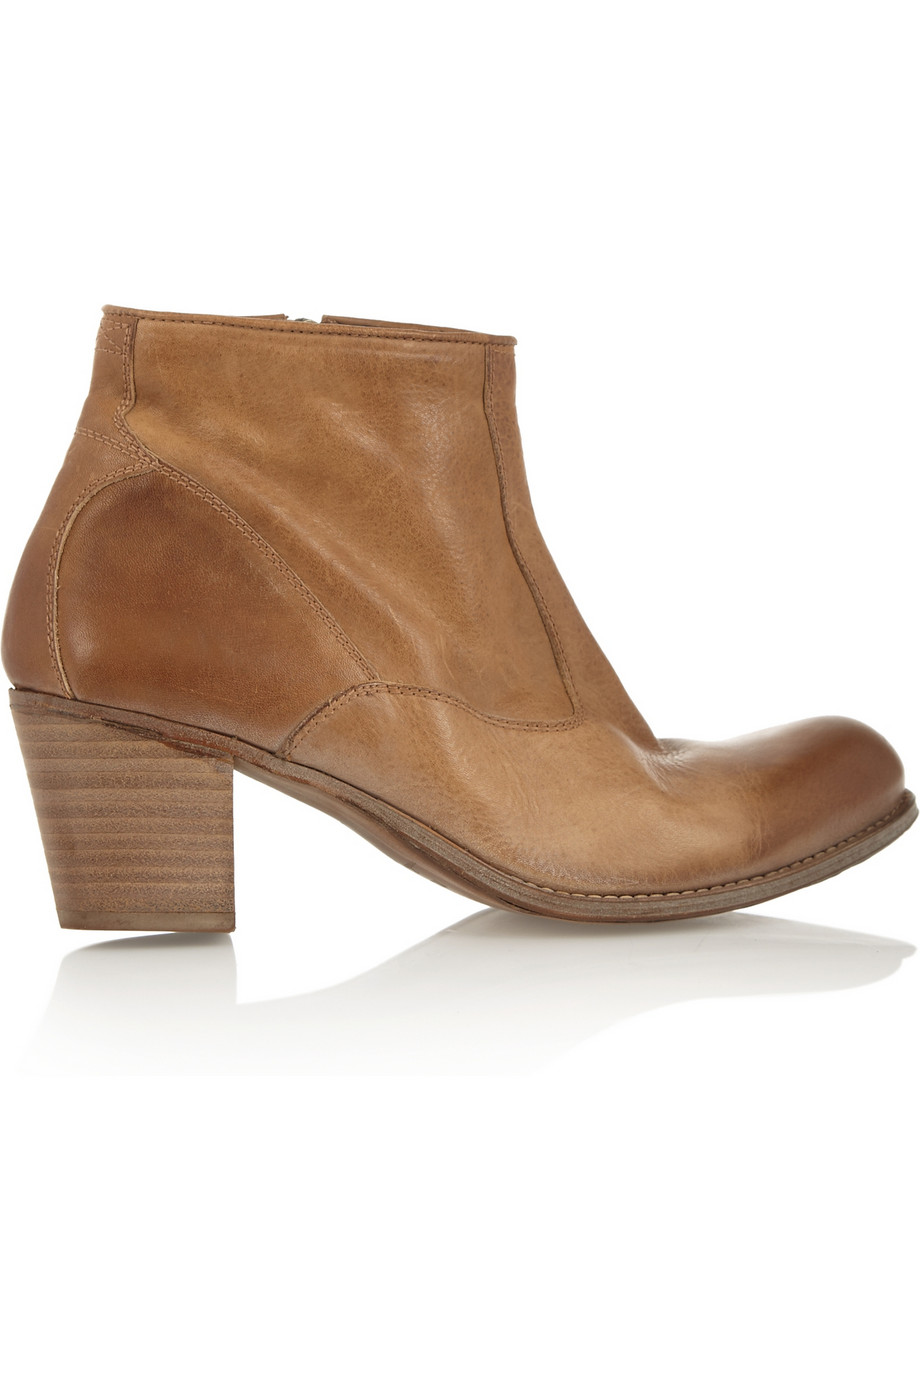 Lyst - Ndc Distressed Leather Ankle Boots in Brown